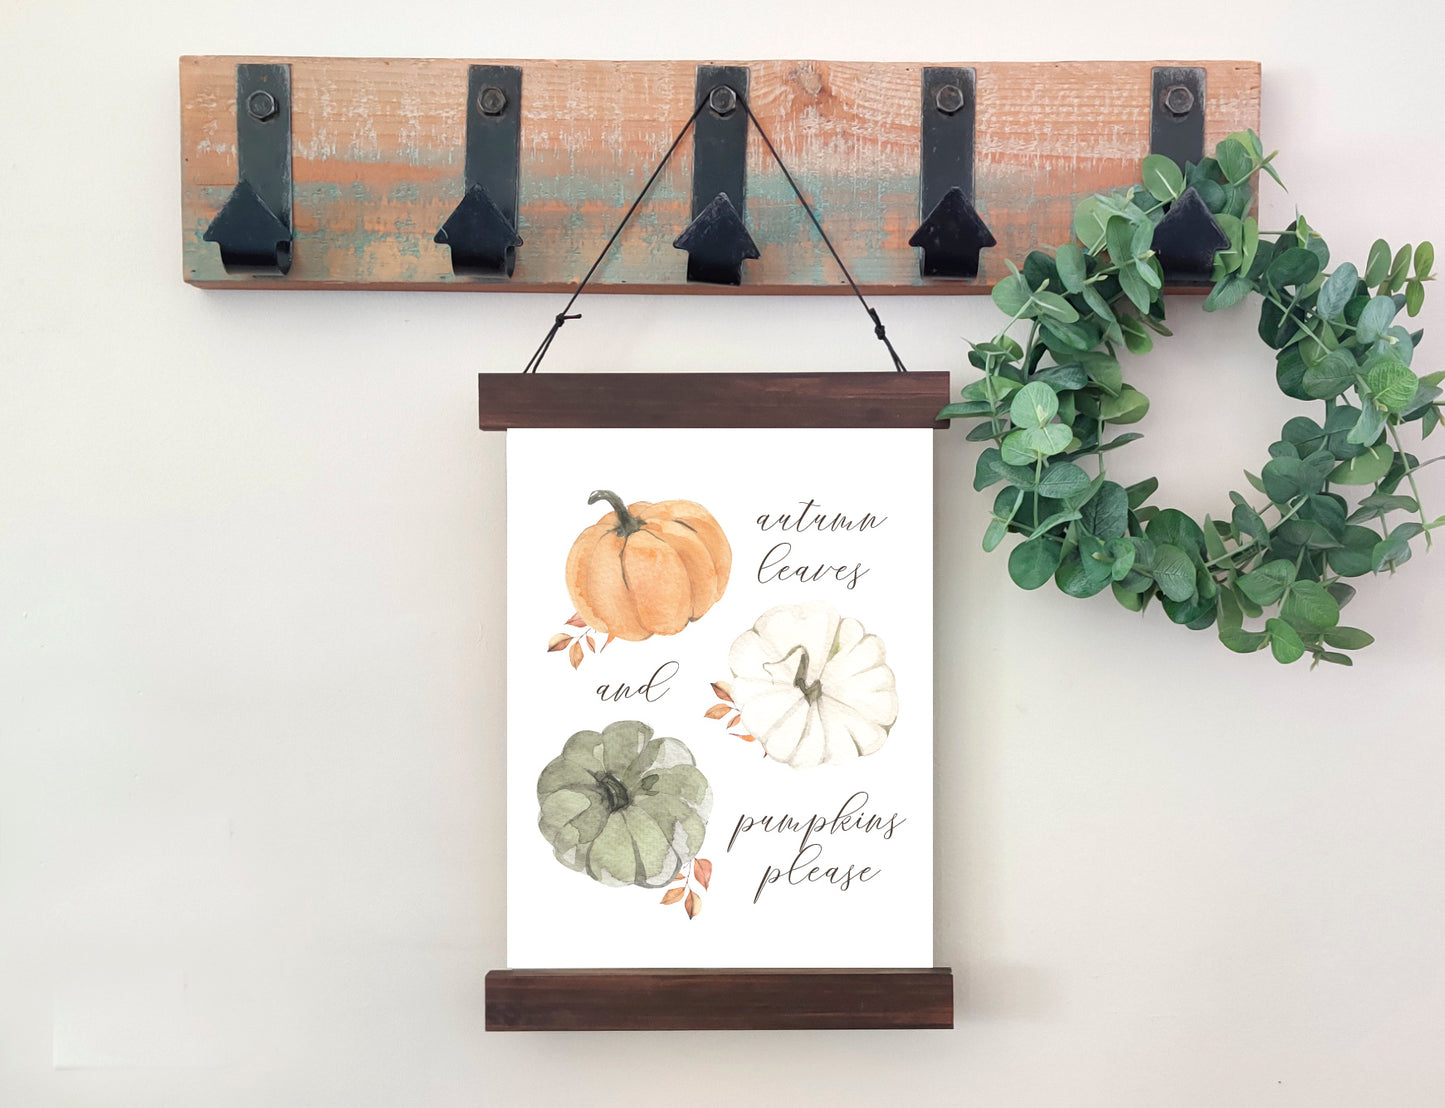 Magnetic Wall Hanging Insert: Autumn Leaves and Pumpkins Please (Thanksgiving/Fall) | INSERT ONLY